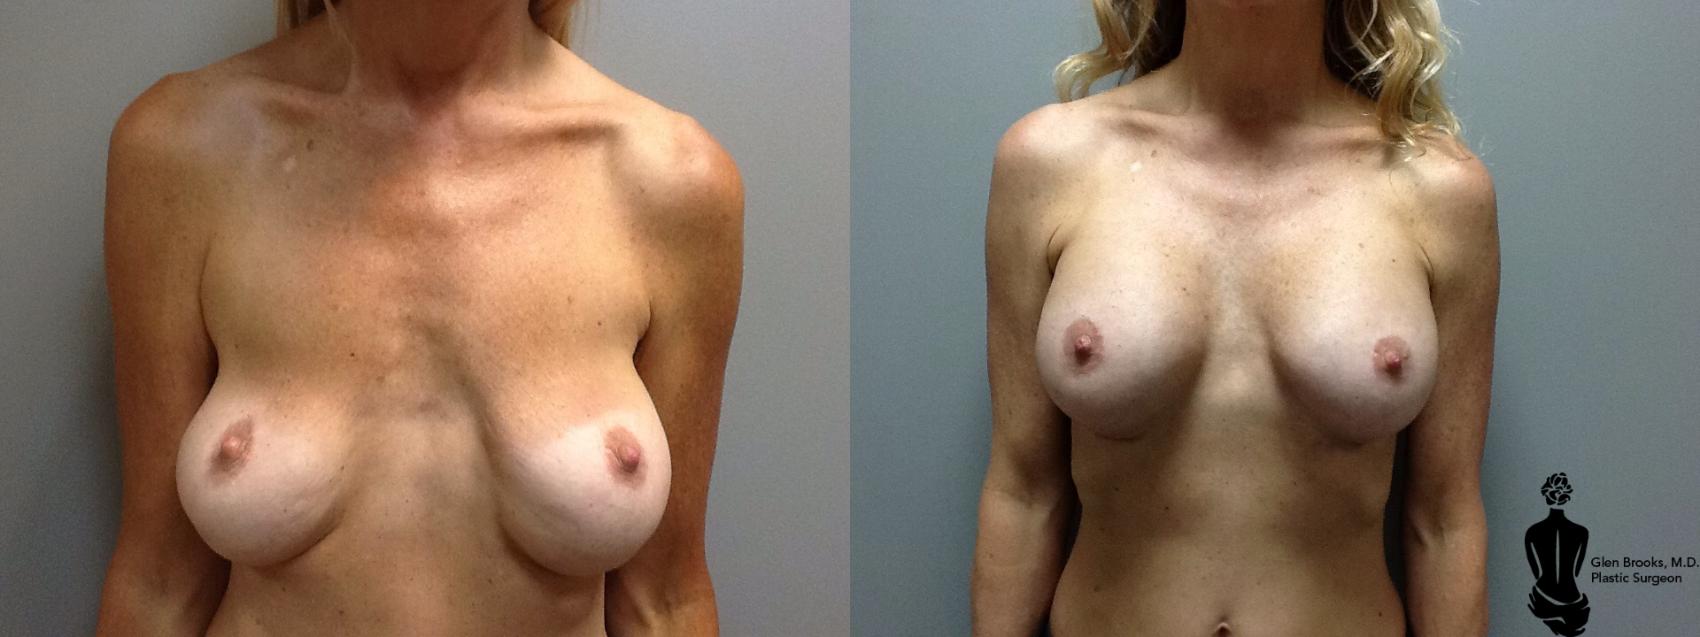 Boob Job Before And After Nude photo 3